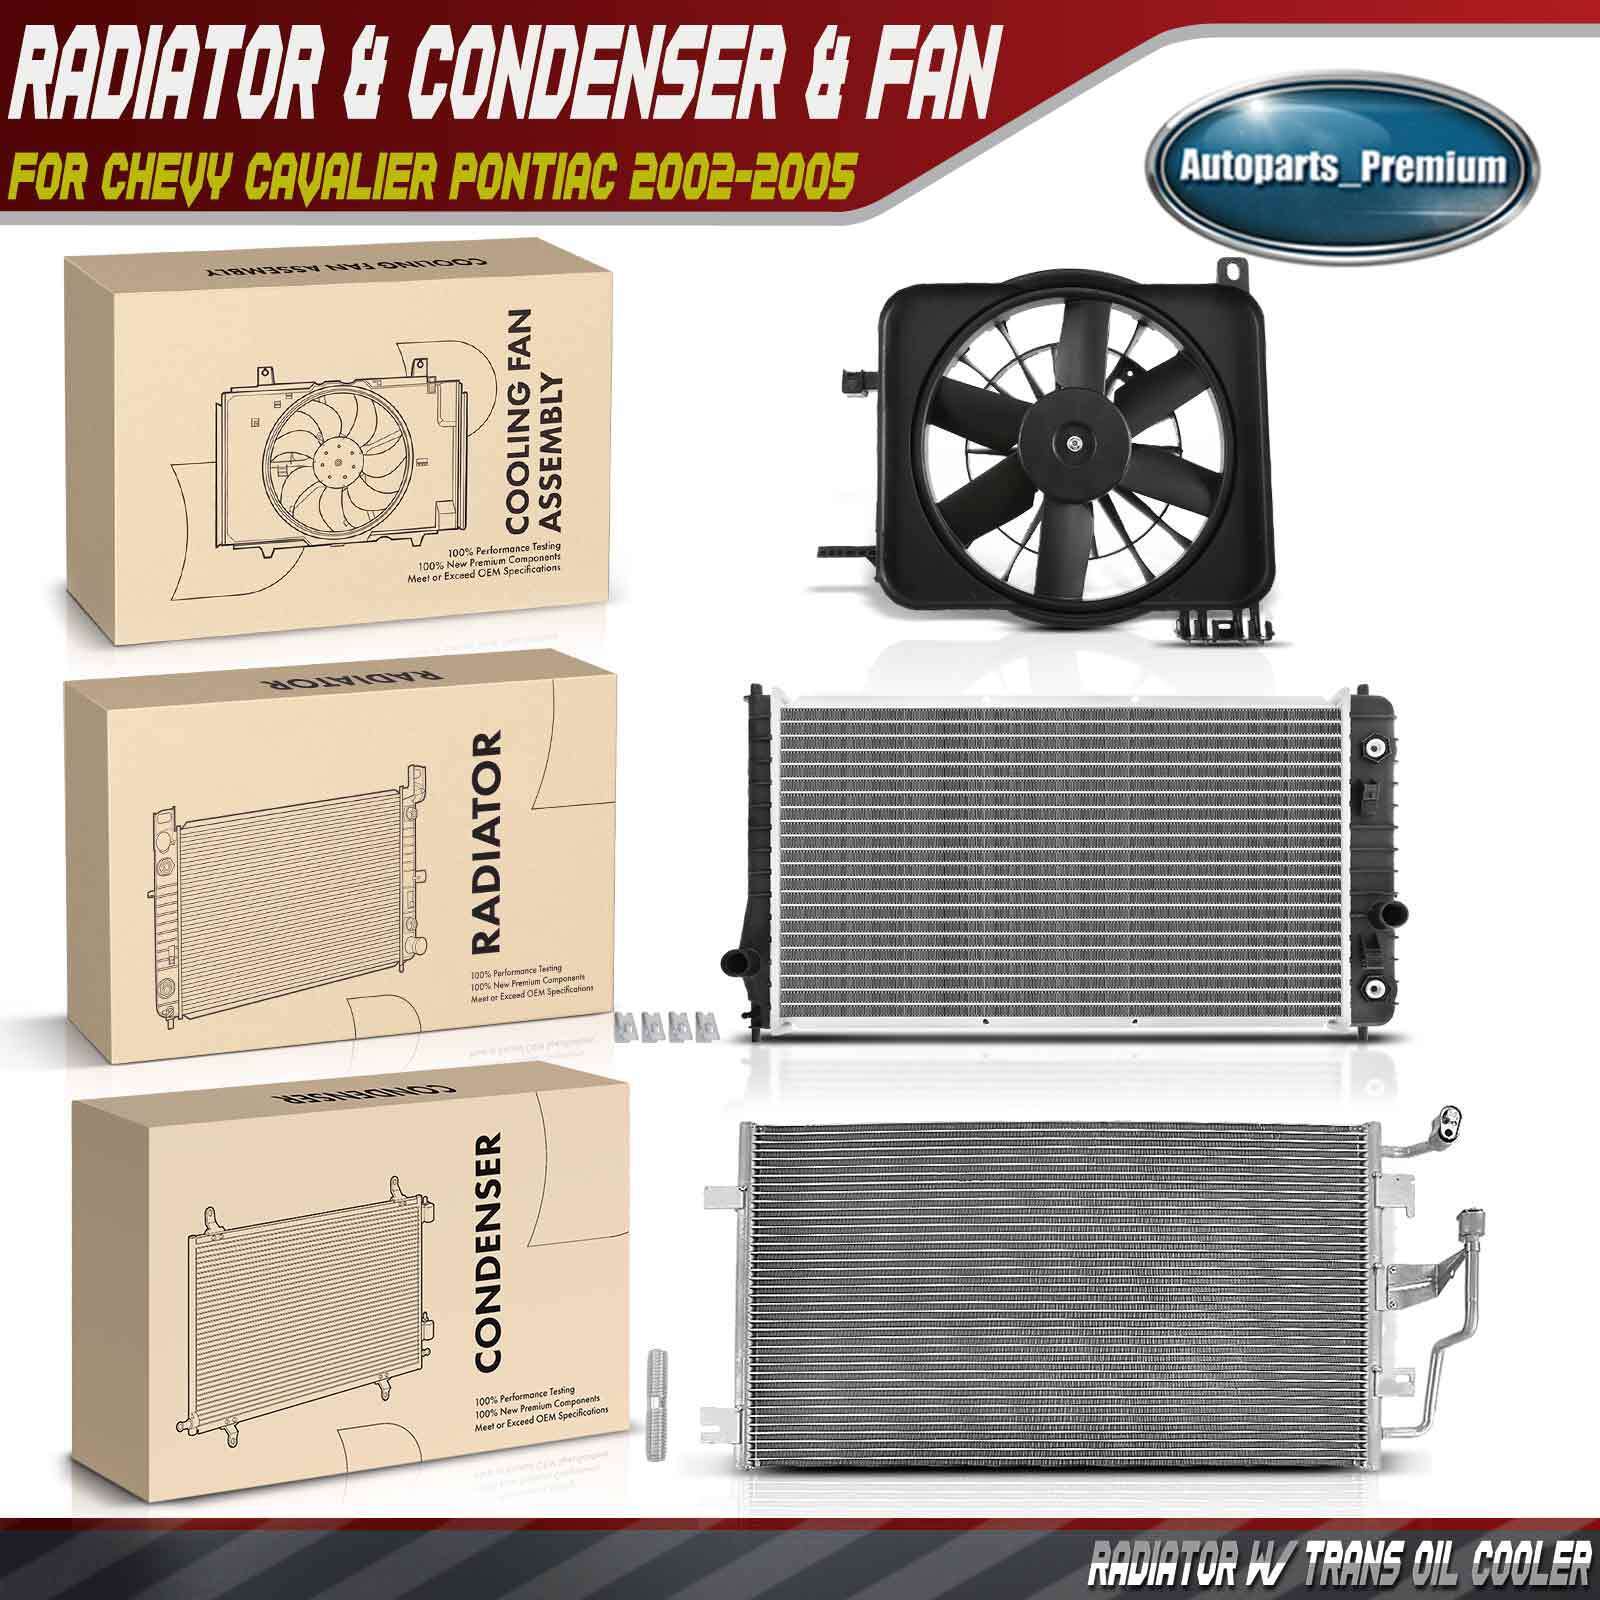 Radiator & AC Condenser & Cooling Fan Kit for Chevy Cavalier Pontiac 2002-2005